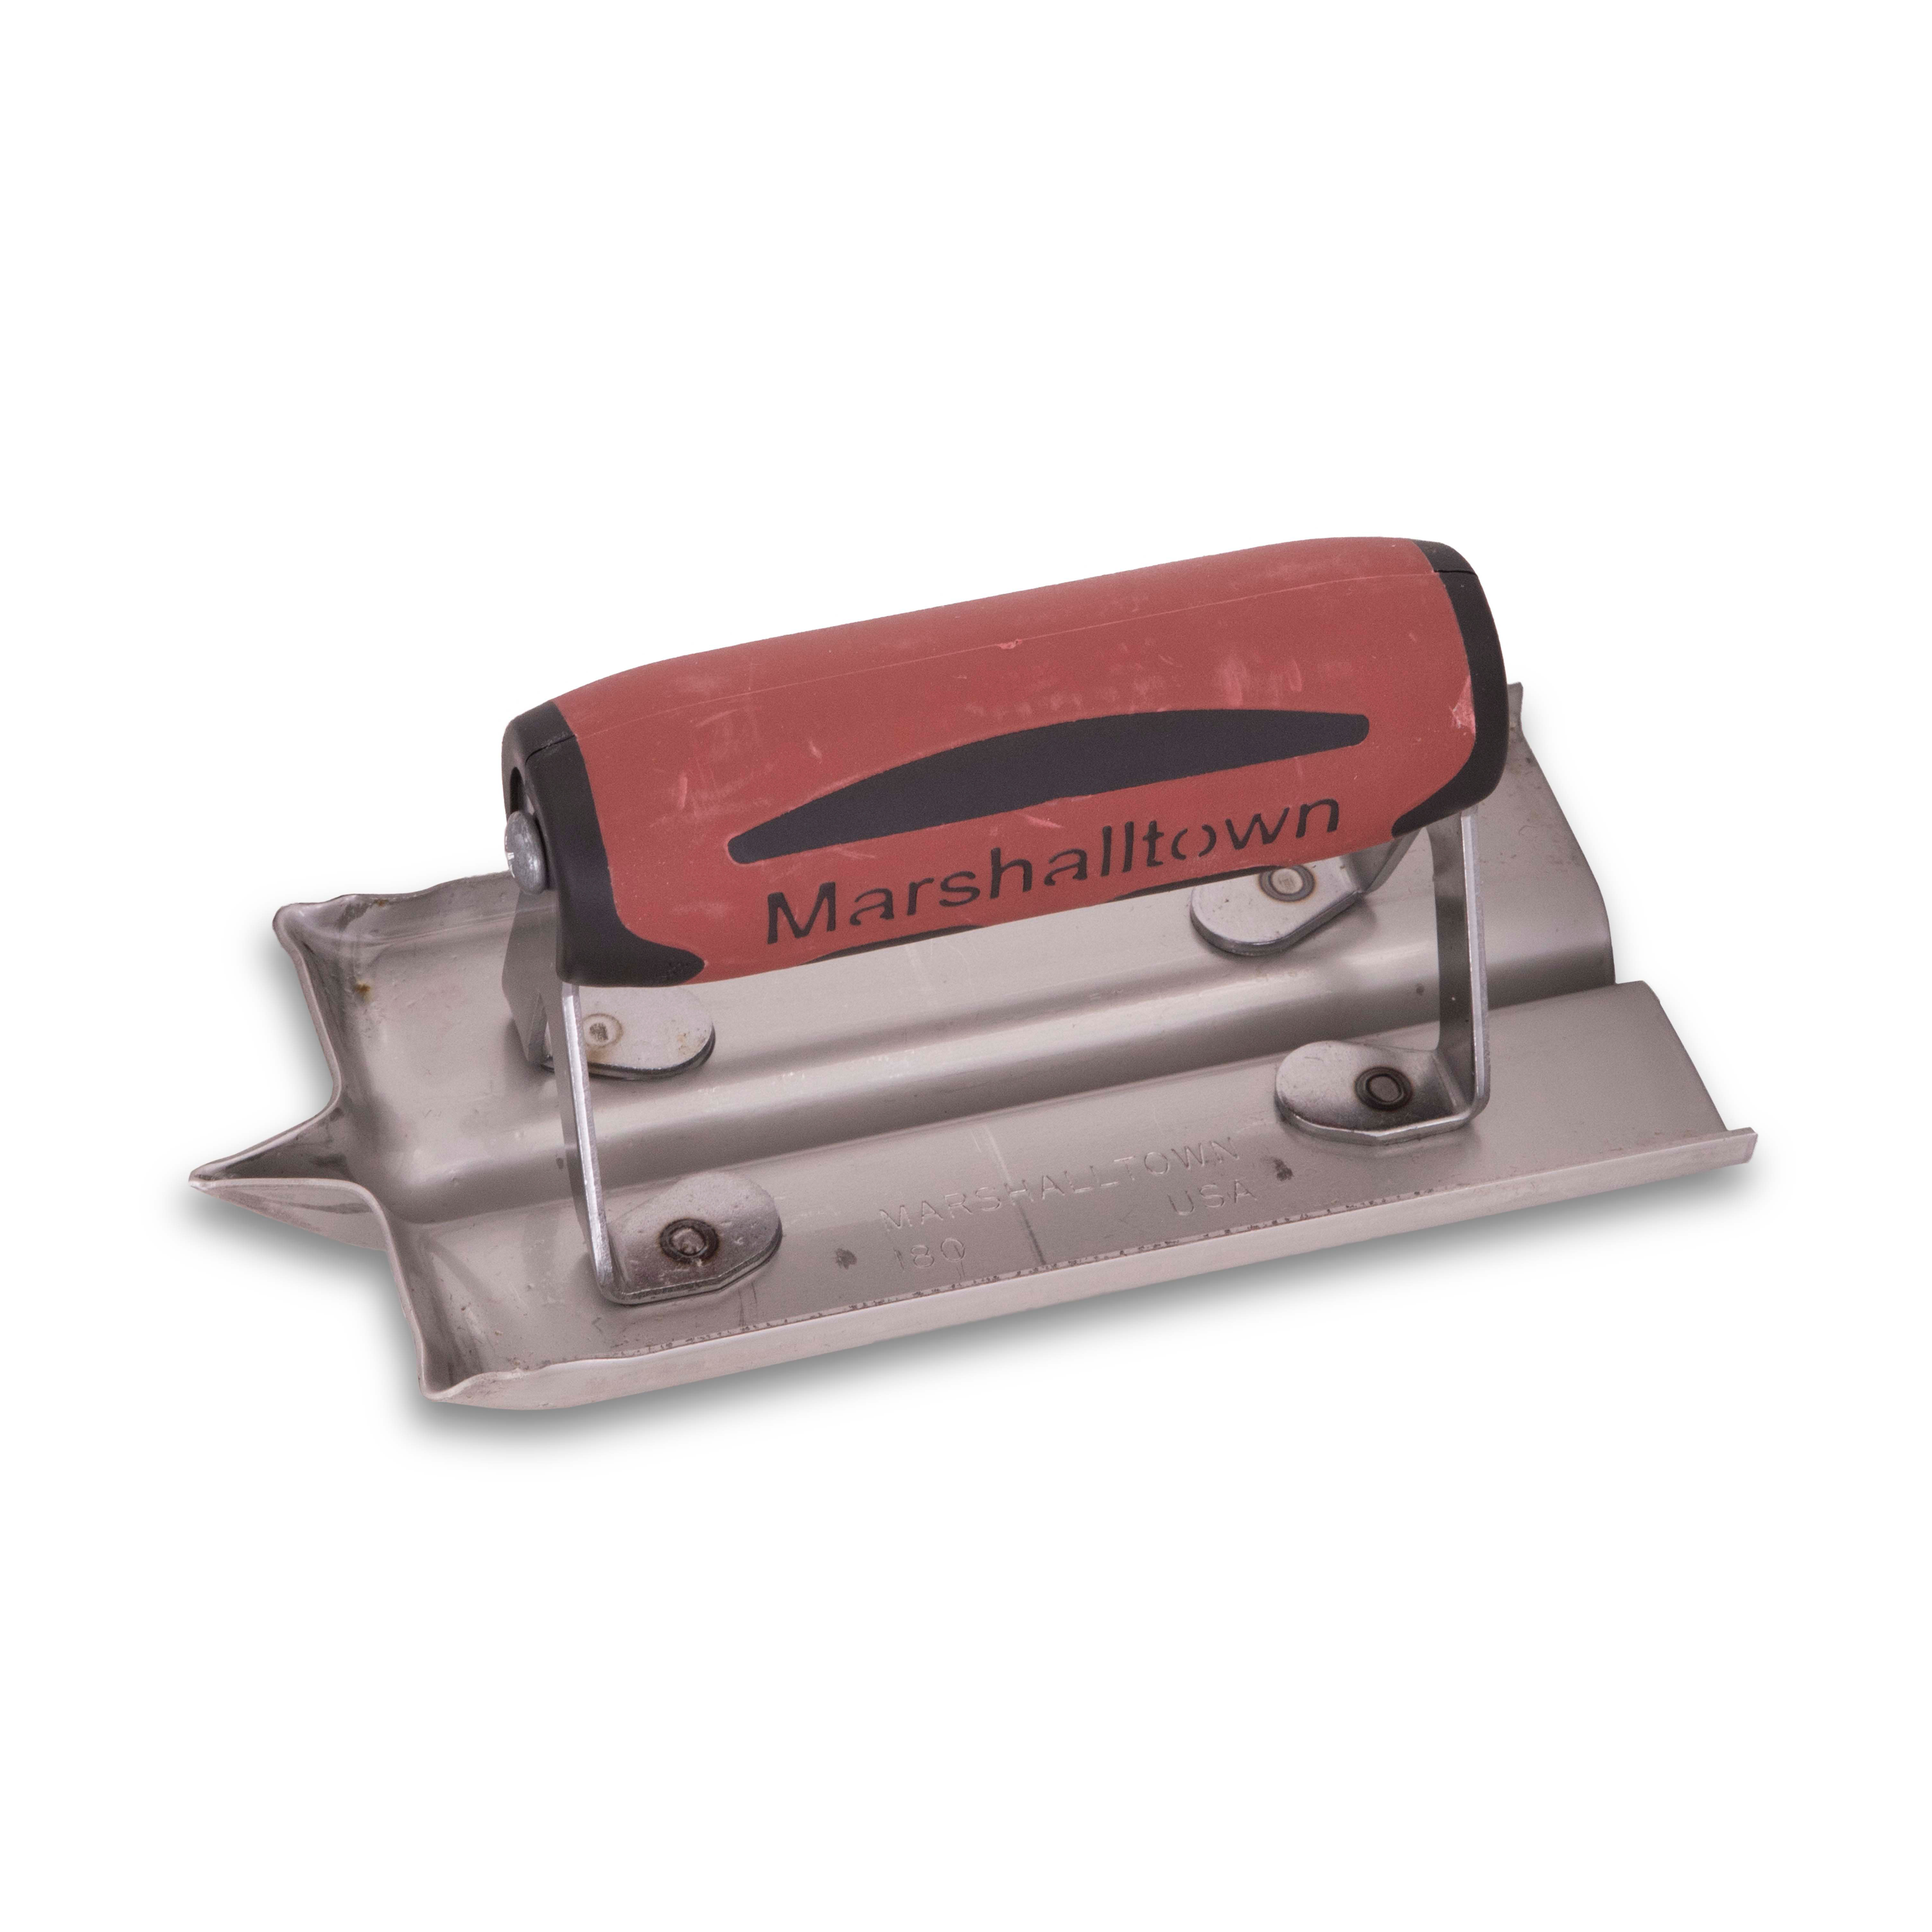 Marshalltown 180D 6in. x 3in. Stainless Steel Groover-1/2in. x 1/2 Groove-DS Handle MAT-180D